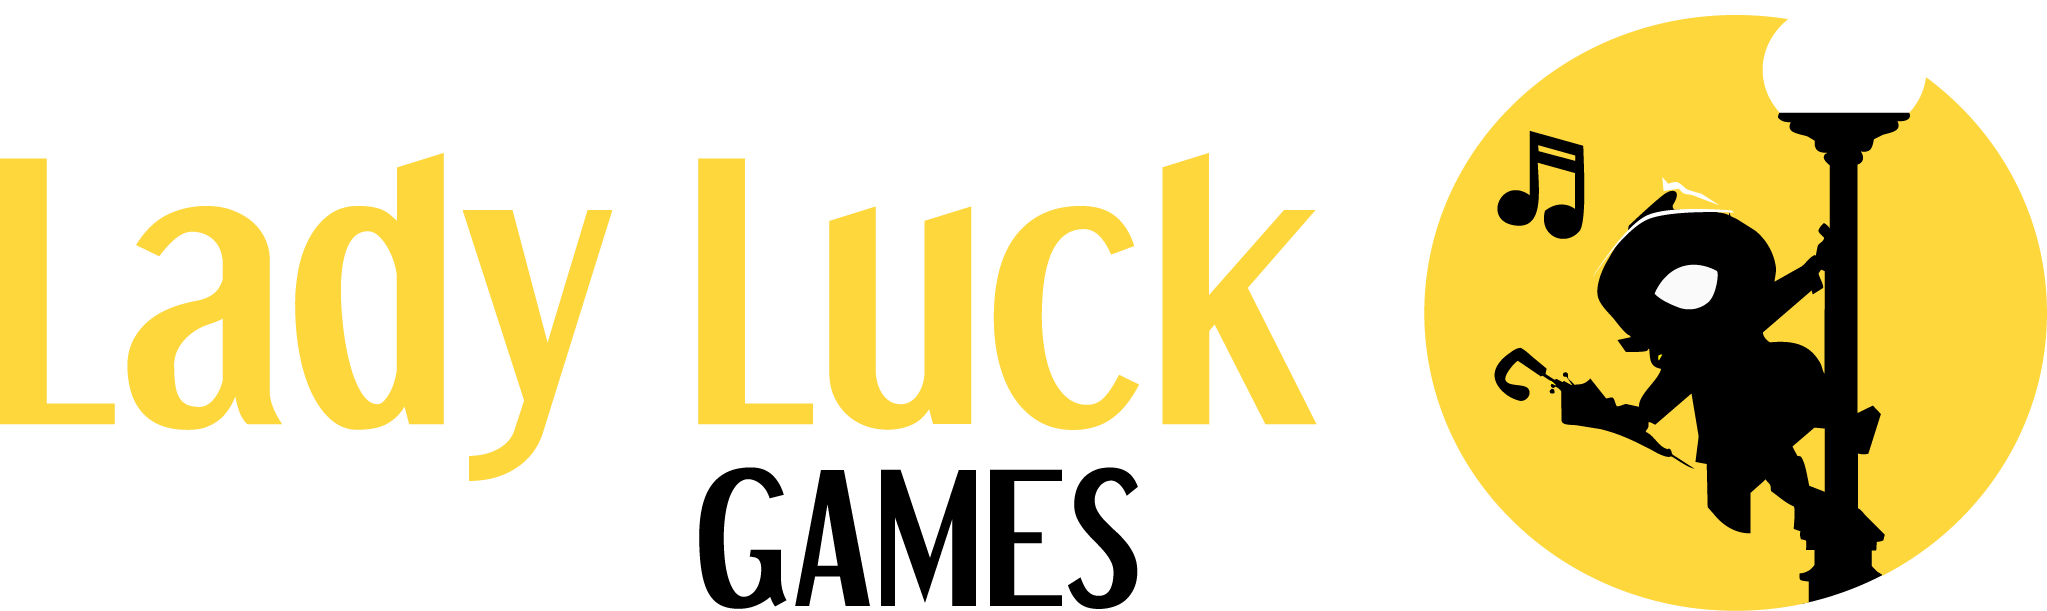 lady luck games logo 